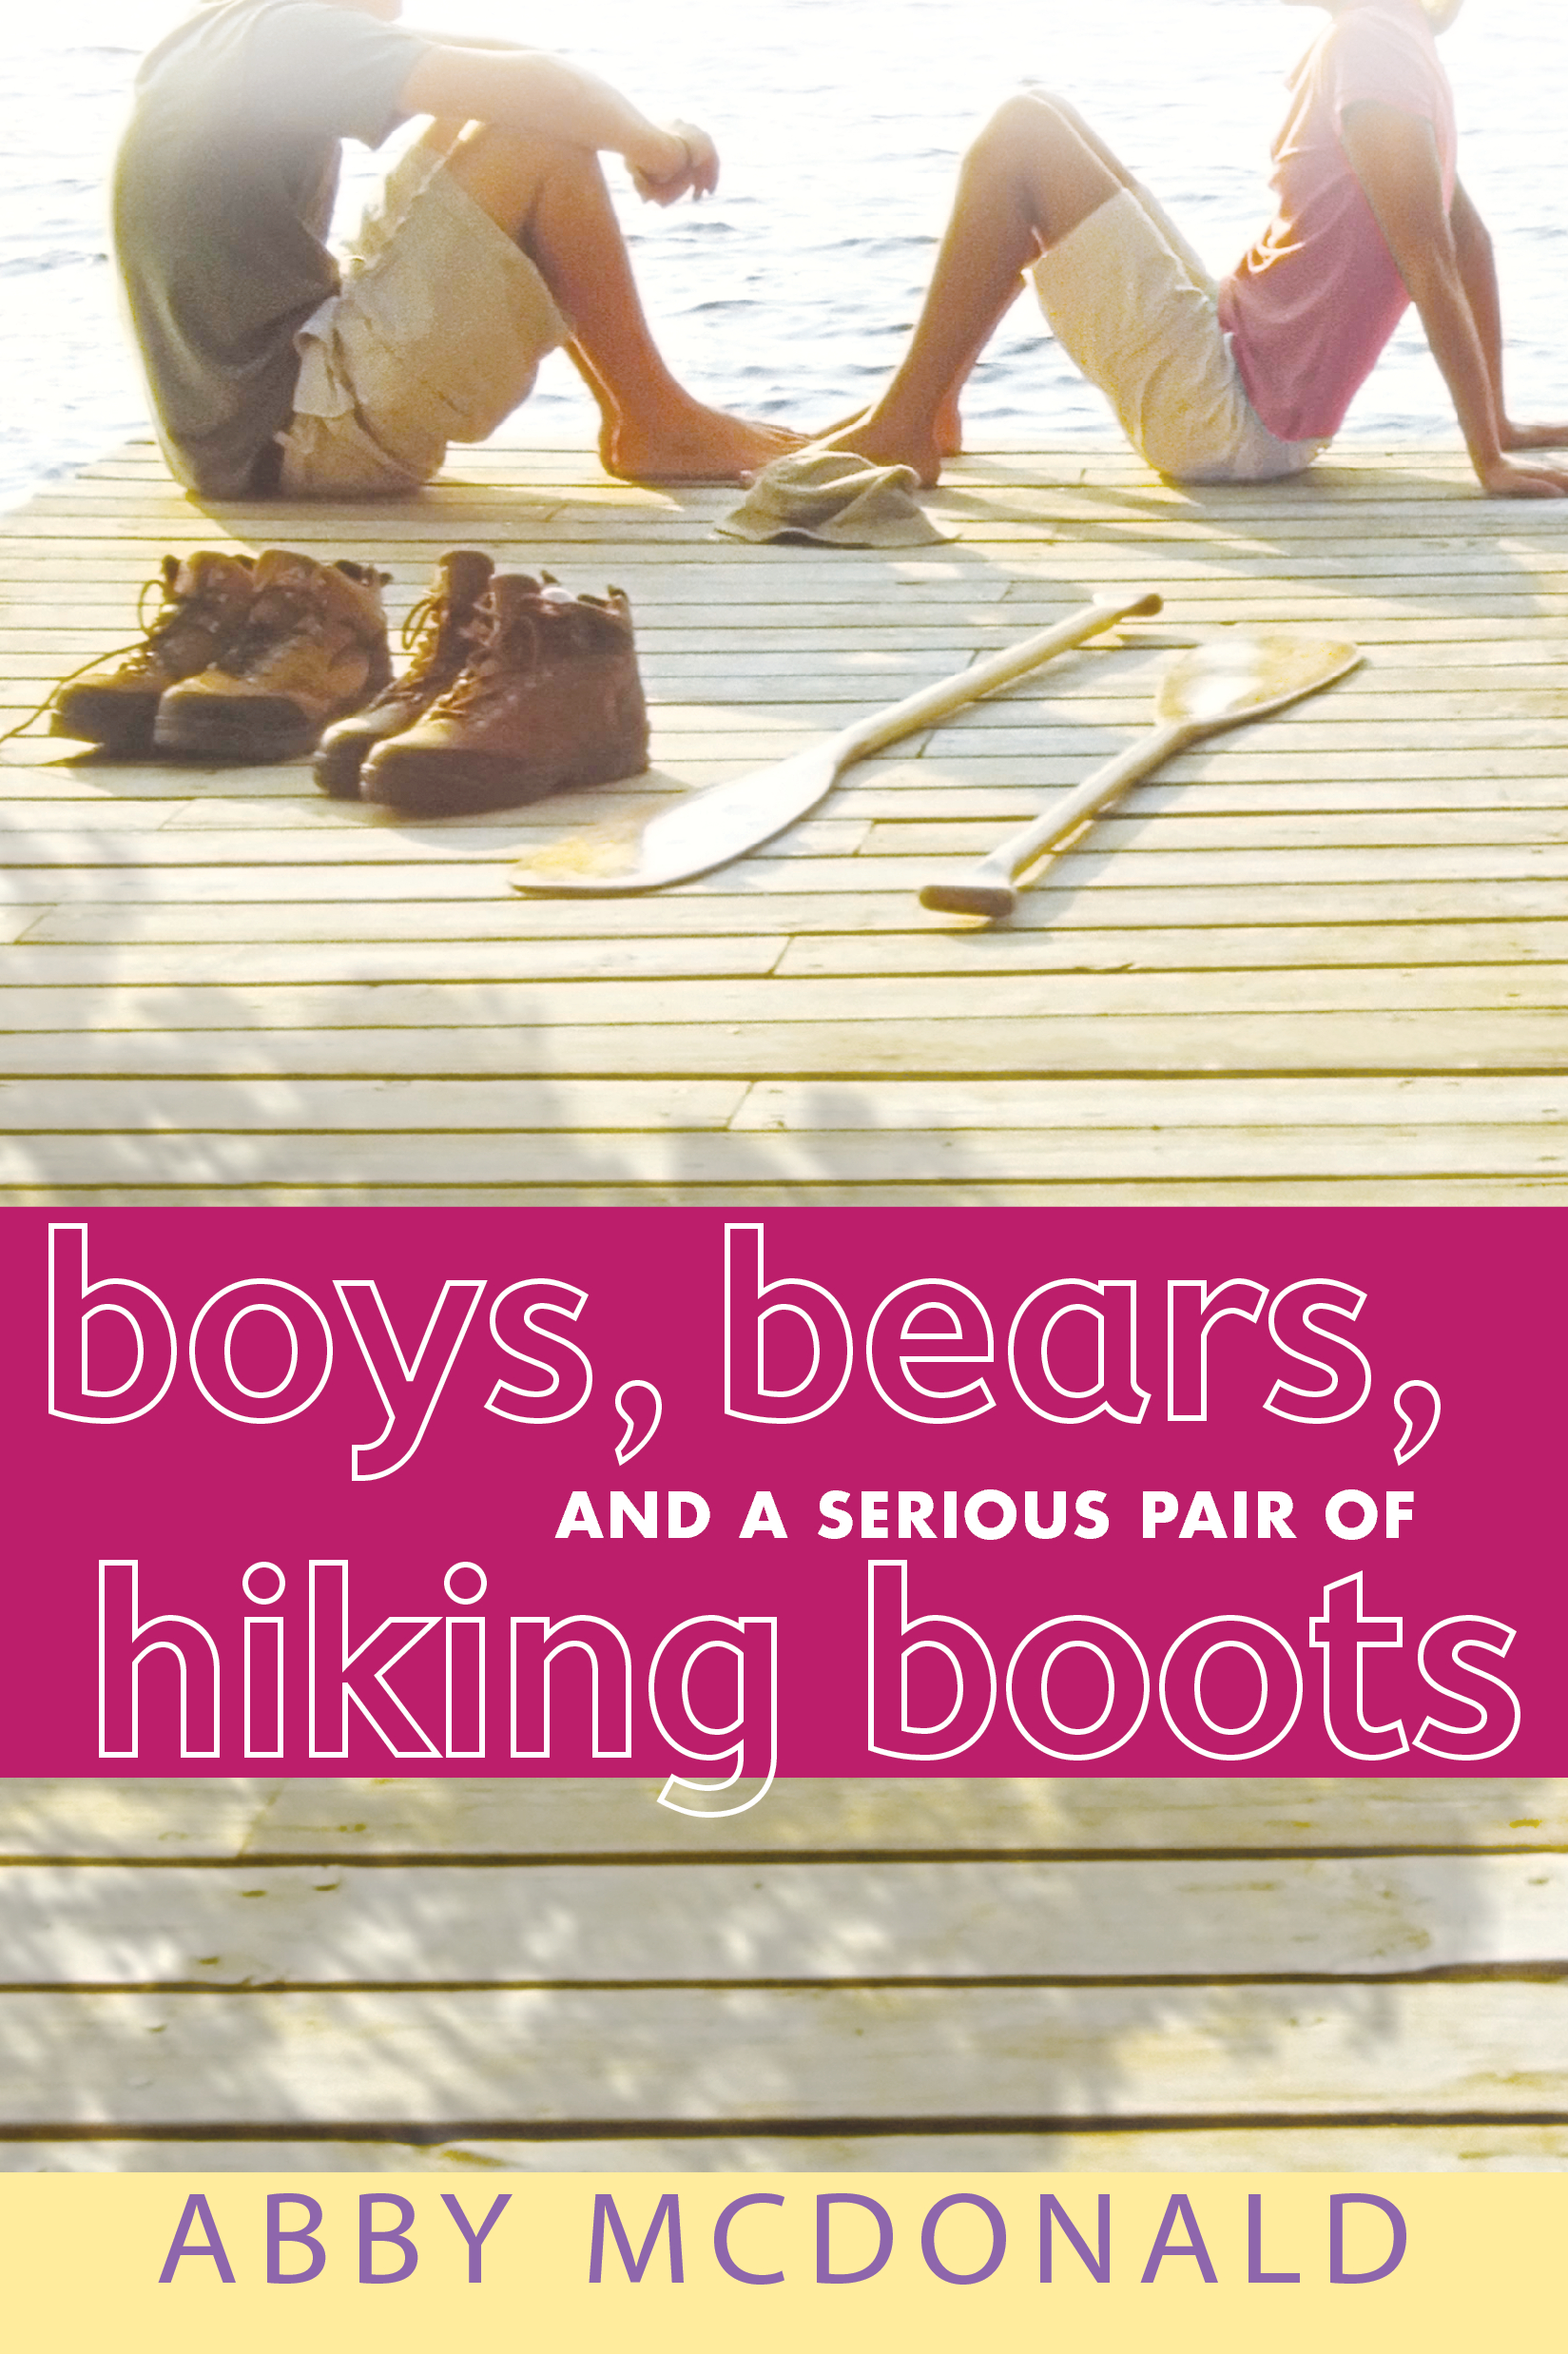 Boys-Bears-and-a-Serious-Pair-of-Hiking-Boots